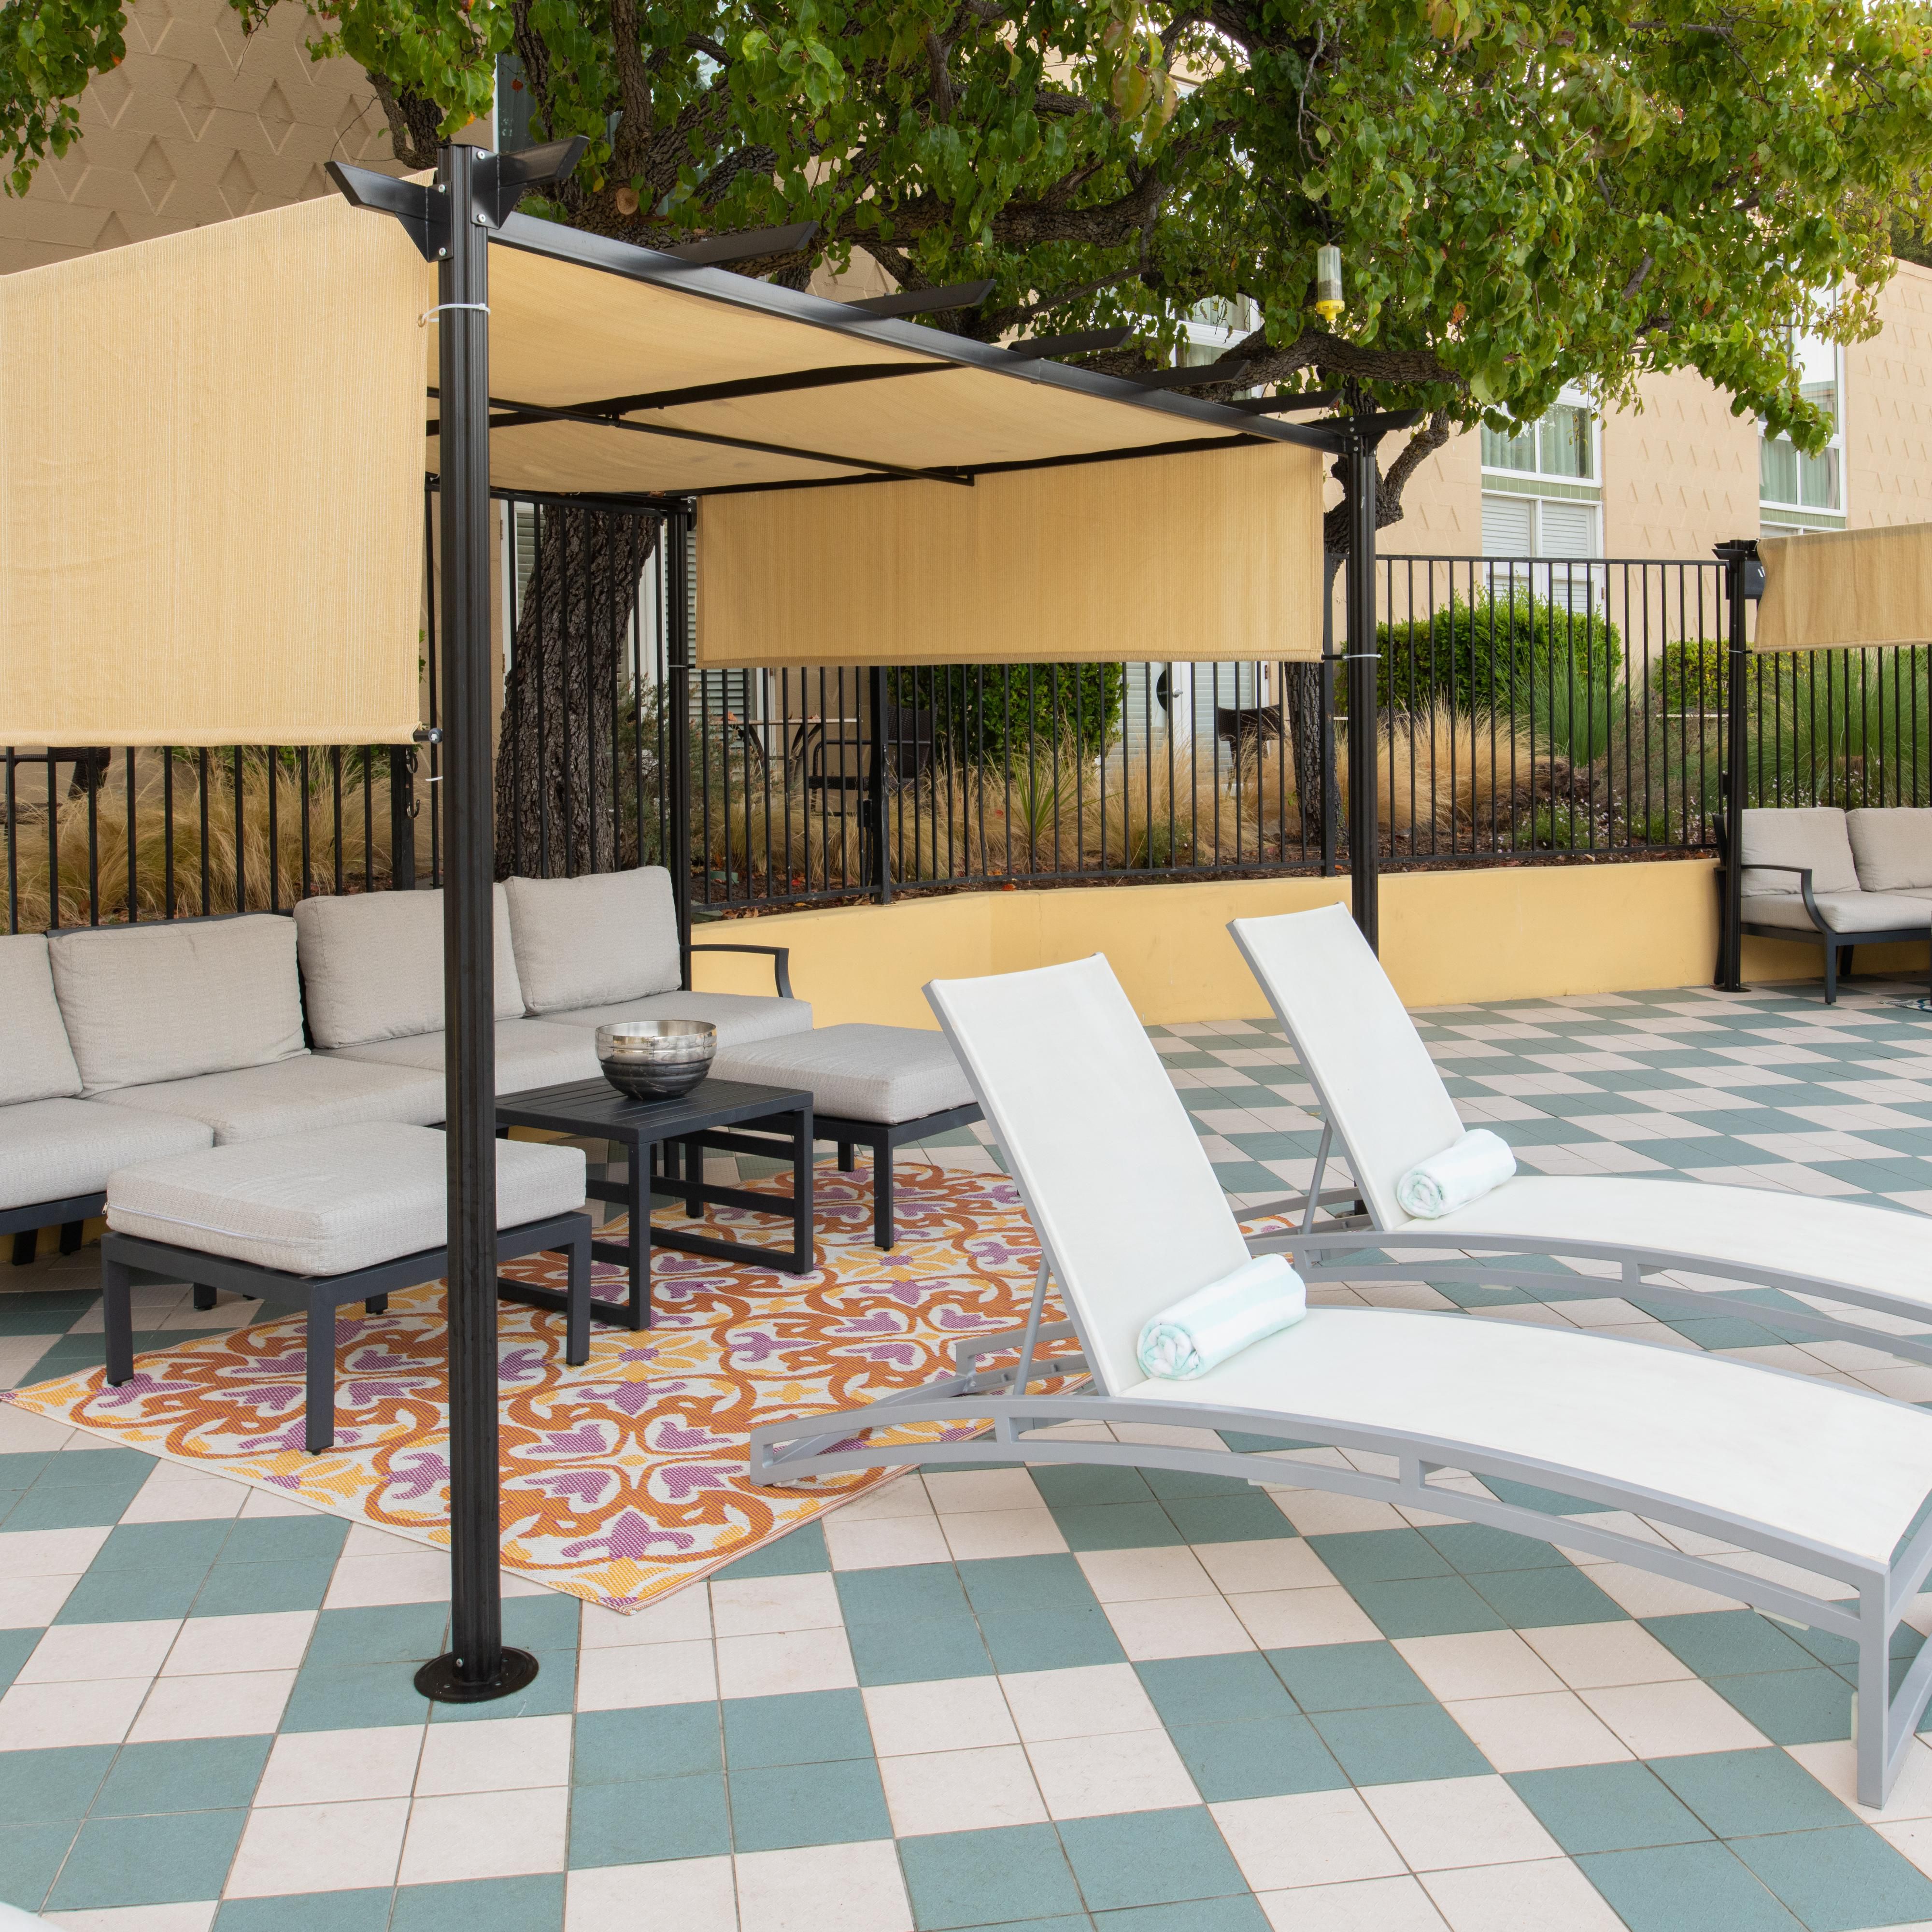 Poolside cabanas available for rent and use.